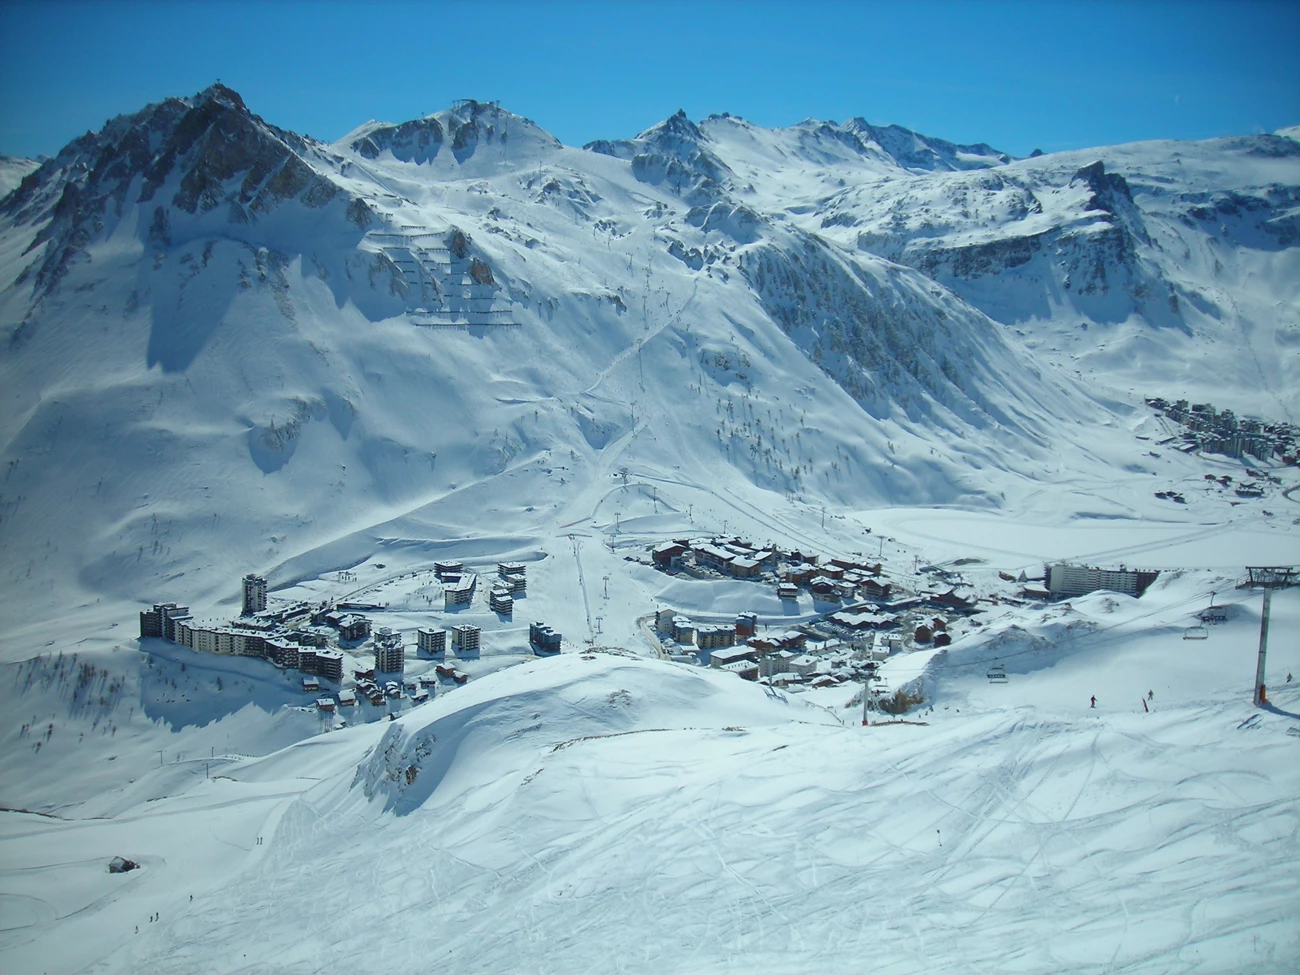 A view over the mountainous snow covered resort of Avoriaz in France